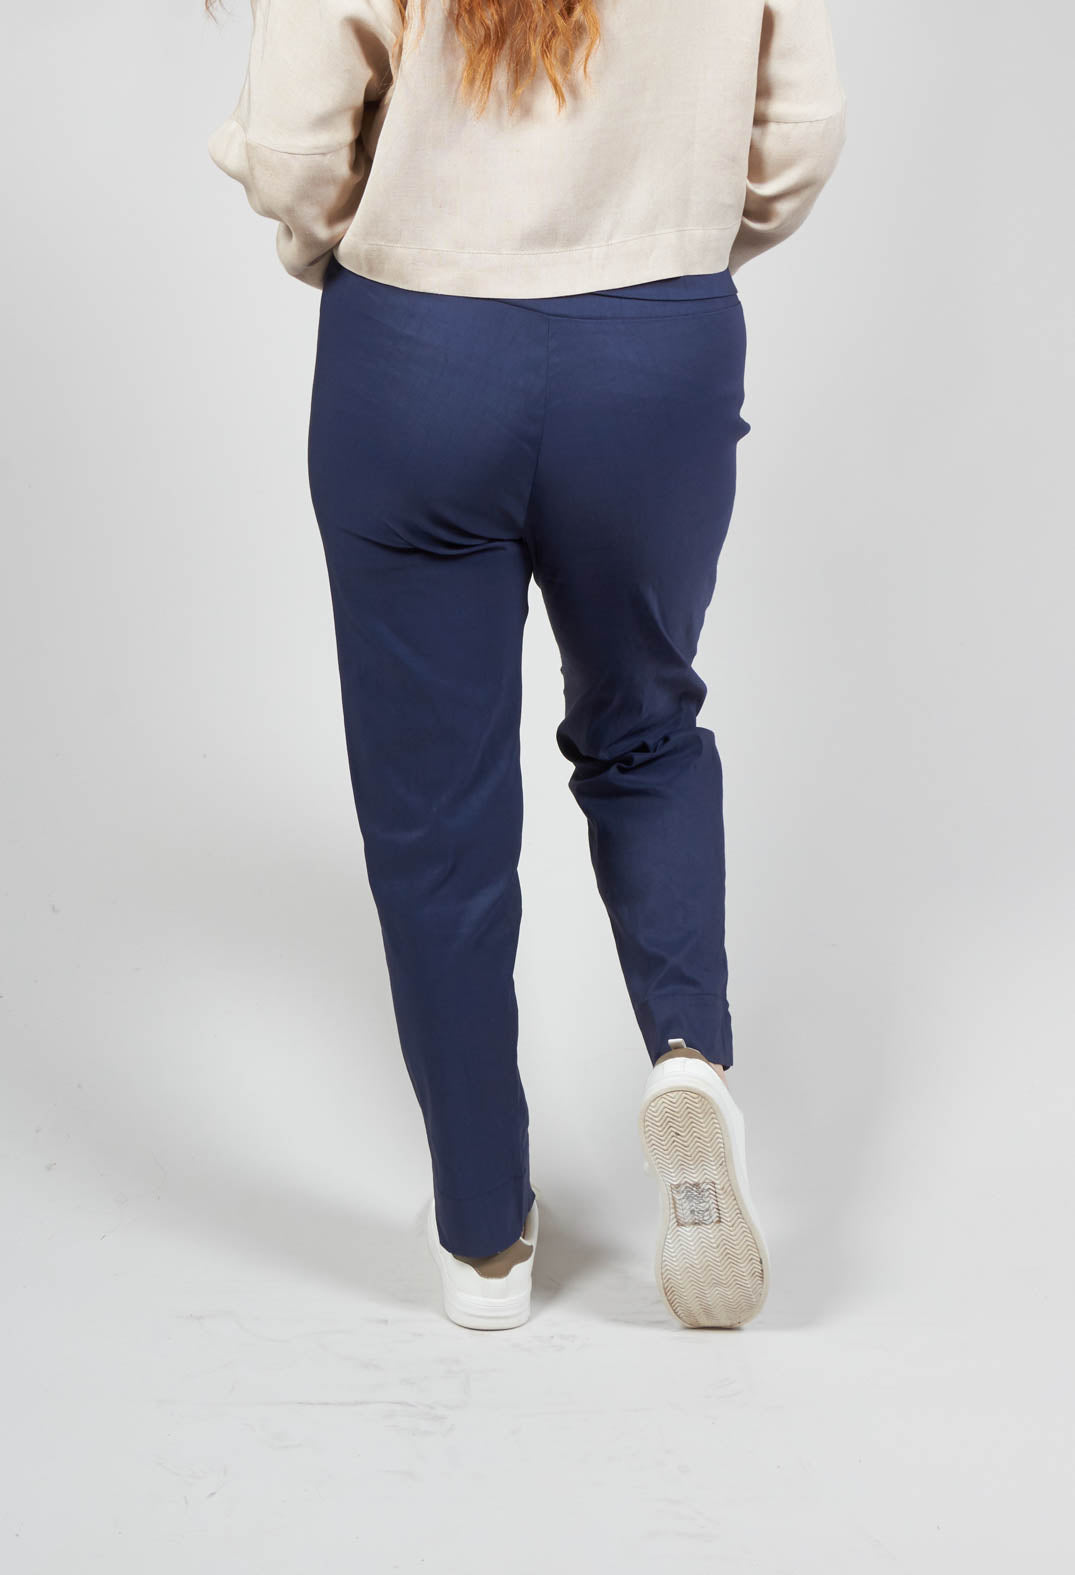 Pull on Trousers with Folded Waistband in Navy